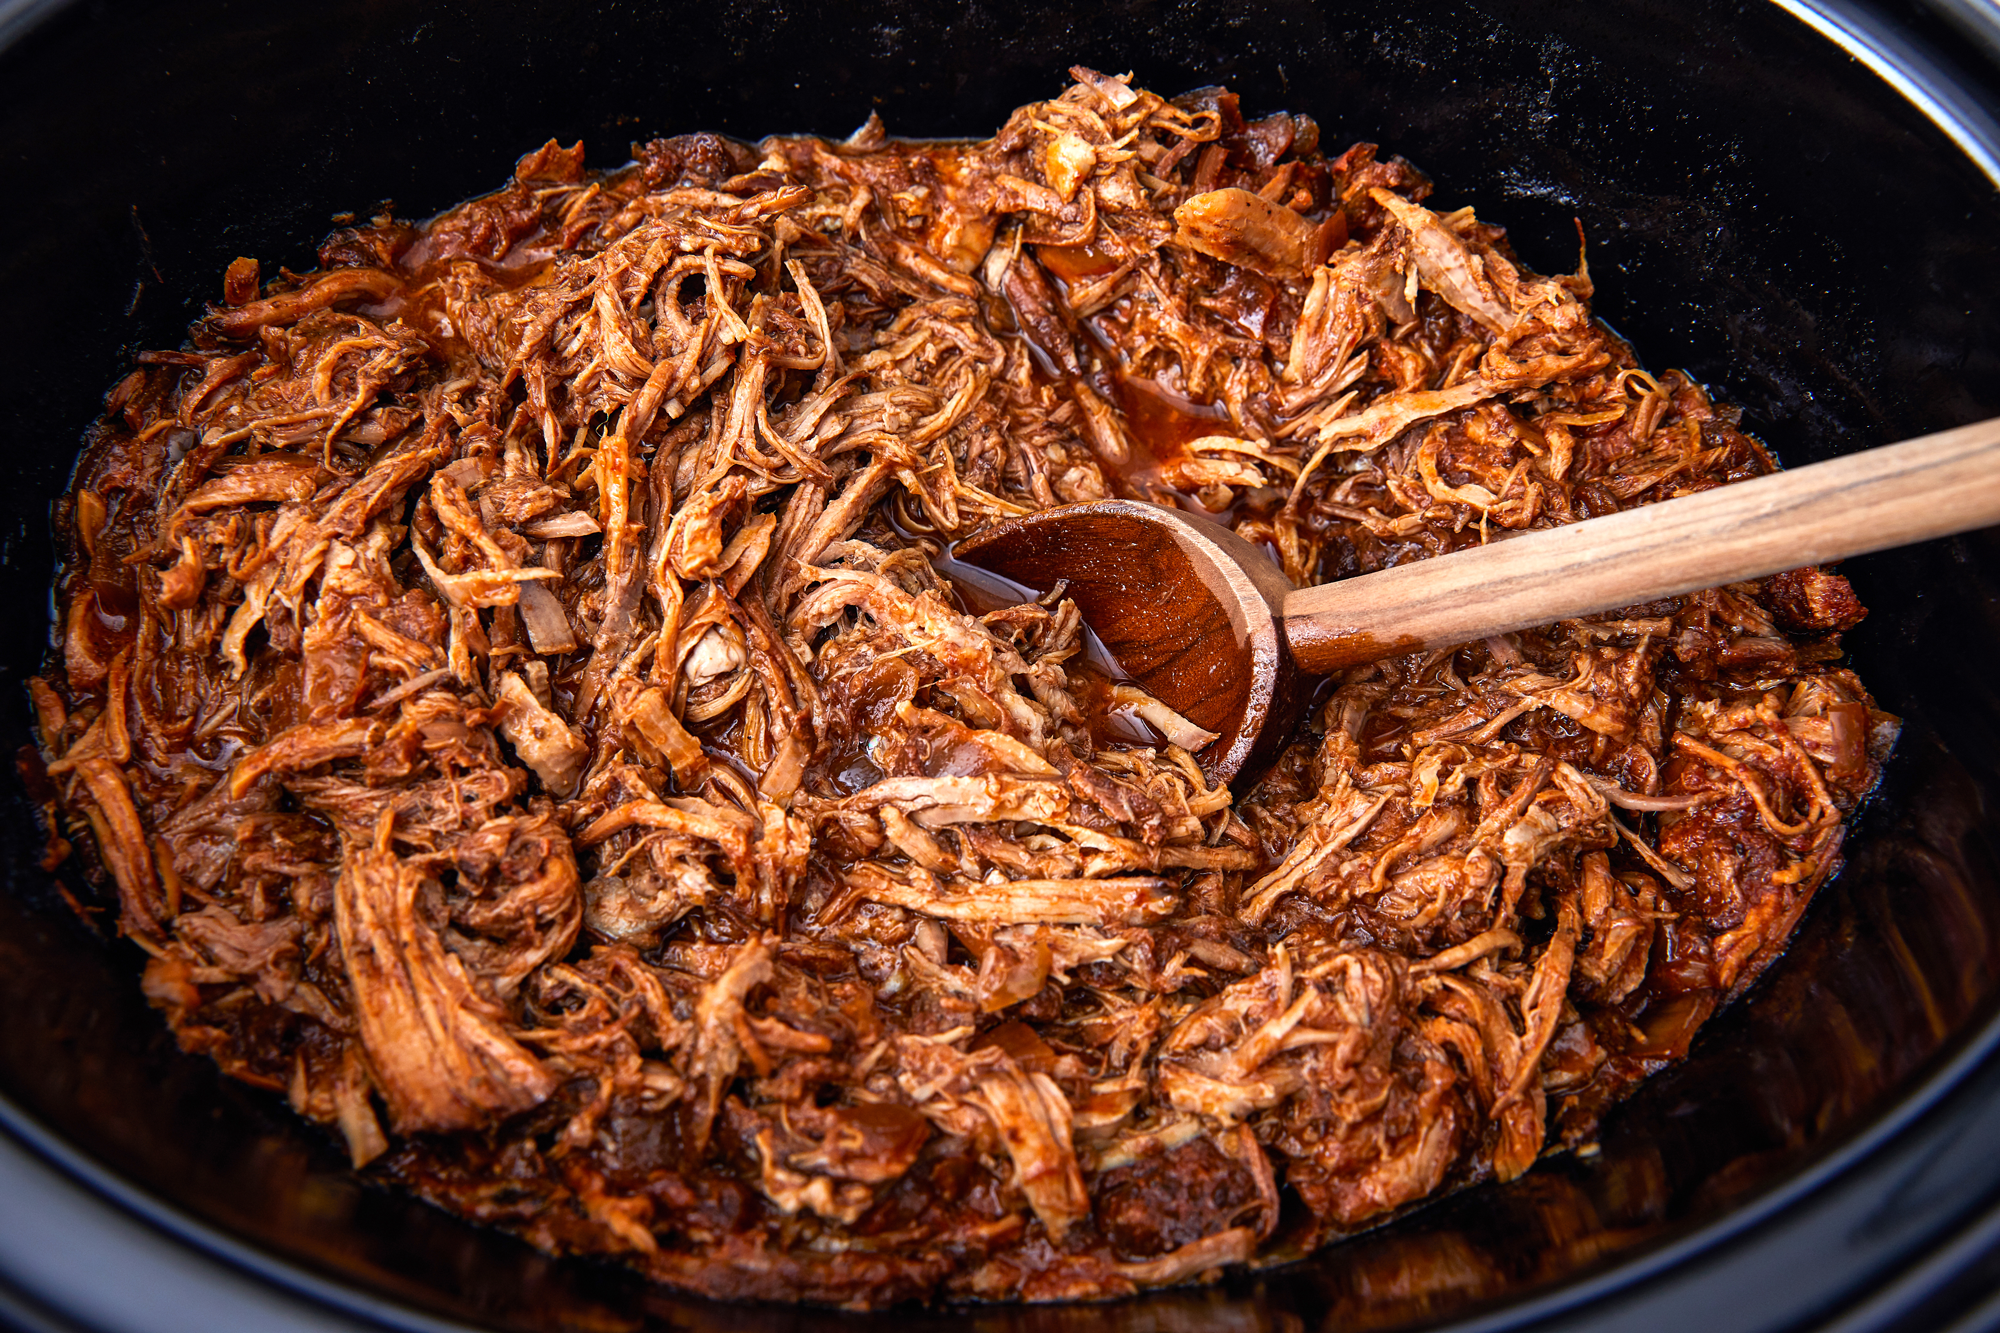 Easy Slow Cooker Pulled Pork How To Make Pulled Pork In A Crock Pot,Etiquette Rules For Email